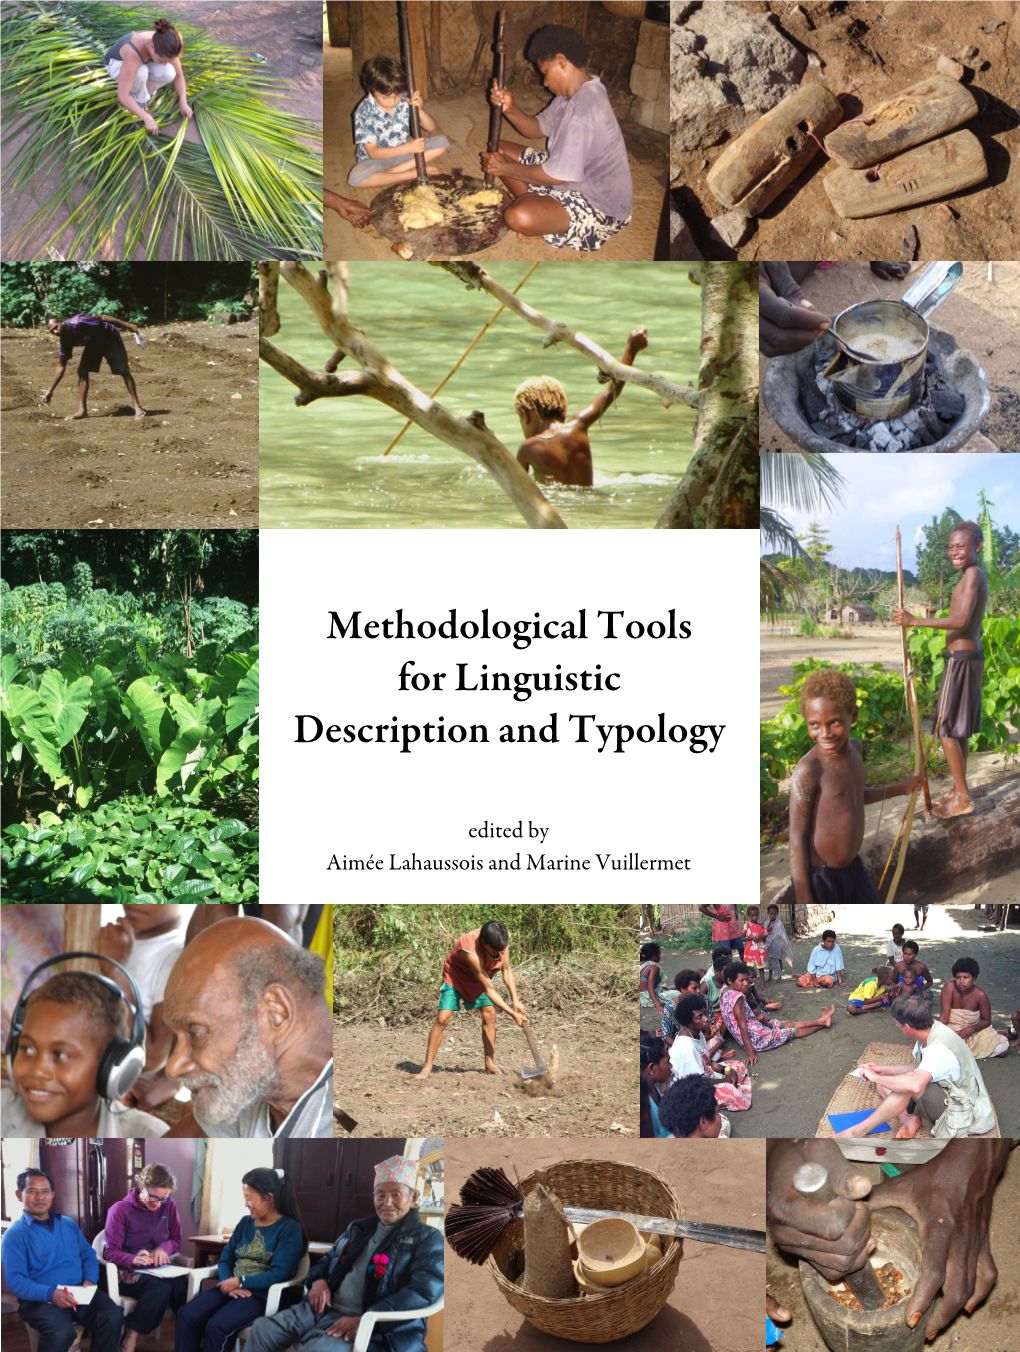 Methodological Tools for Linguistic Description and Typology